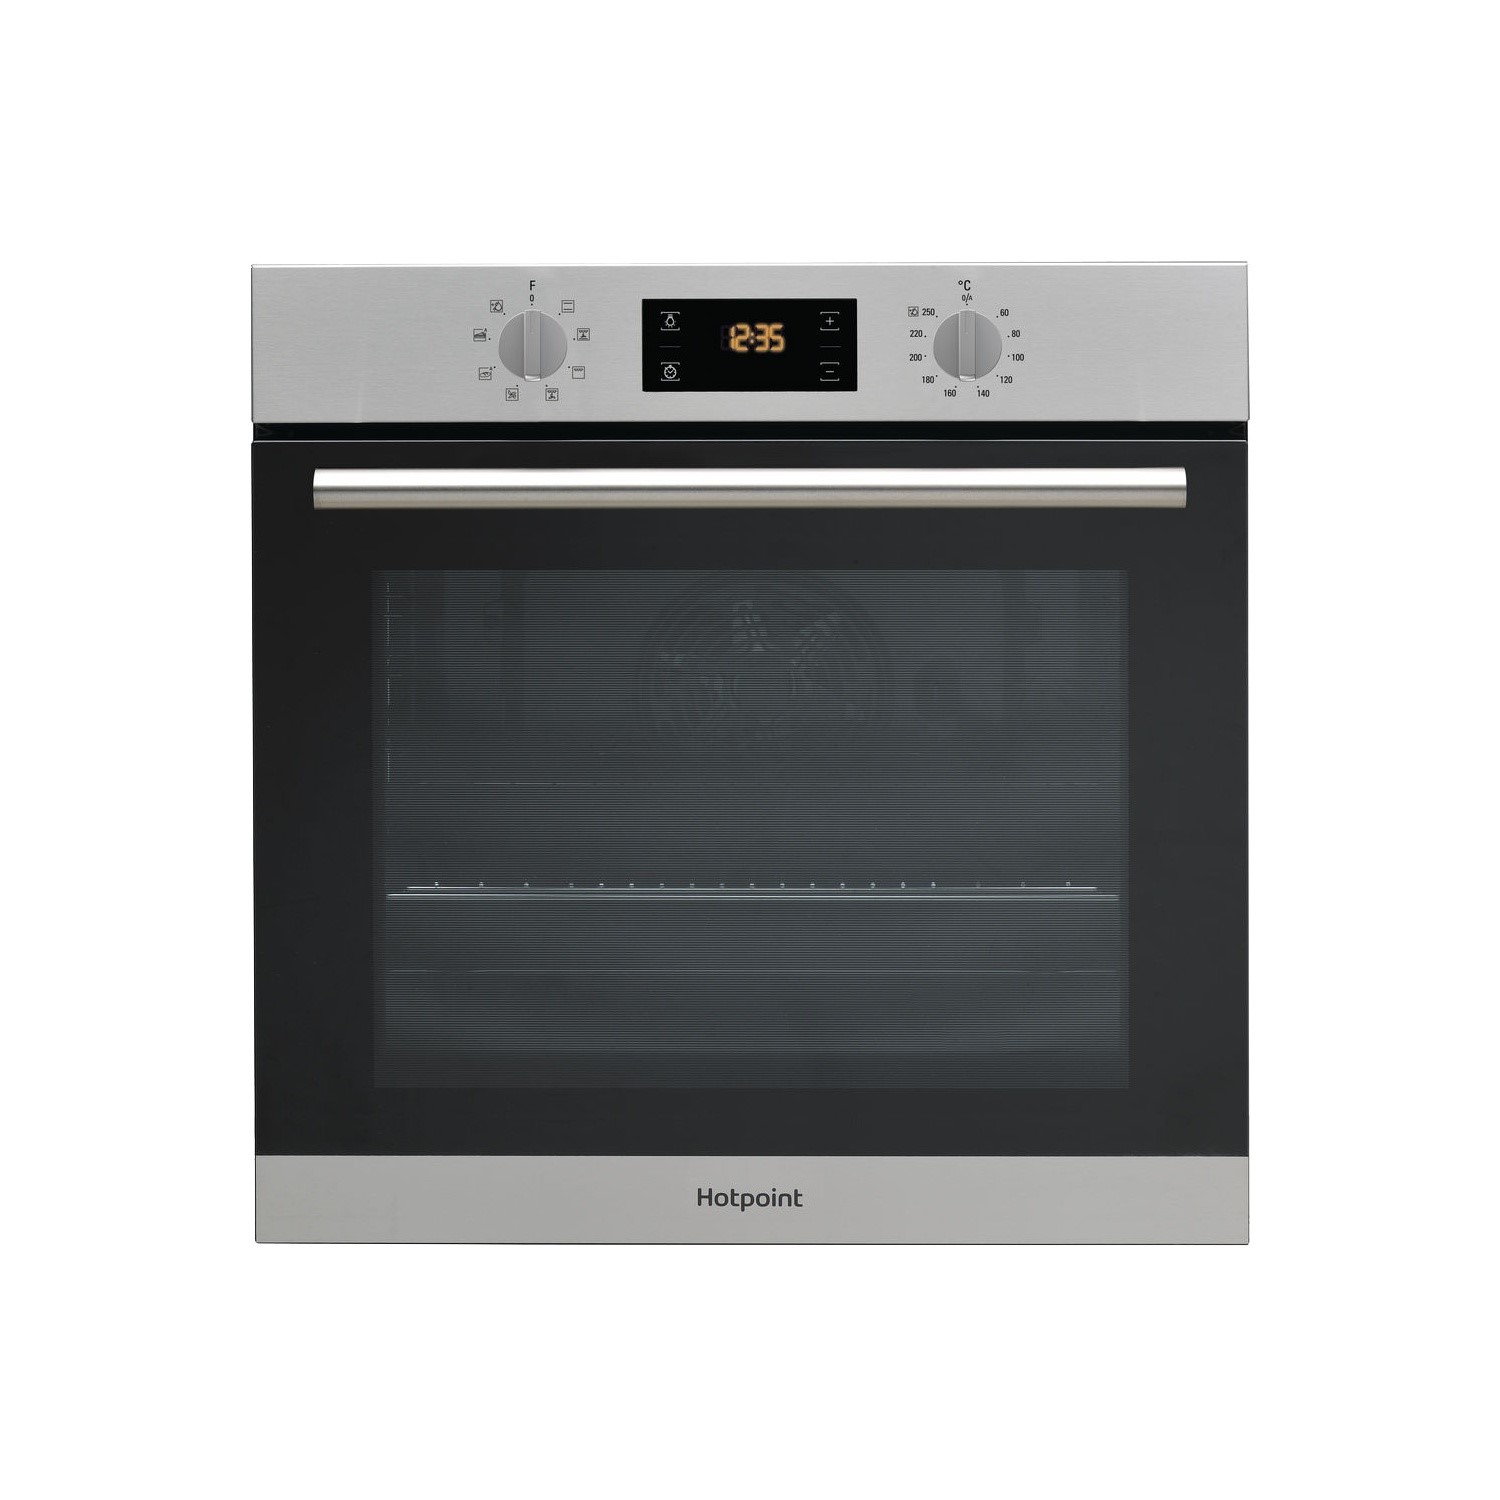 Hotpoint Class 2 SA2540HIX Built In Electric Single Oven - Stainless Steel - A Rated